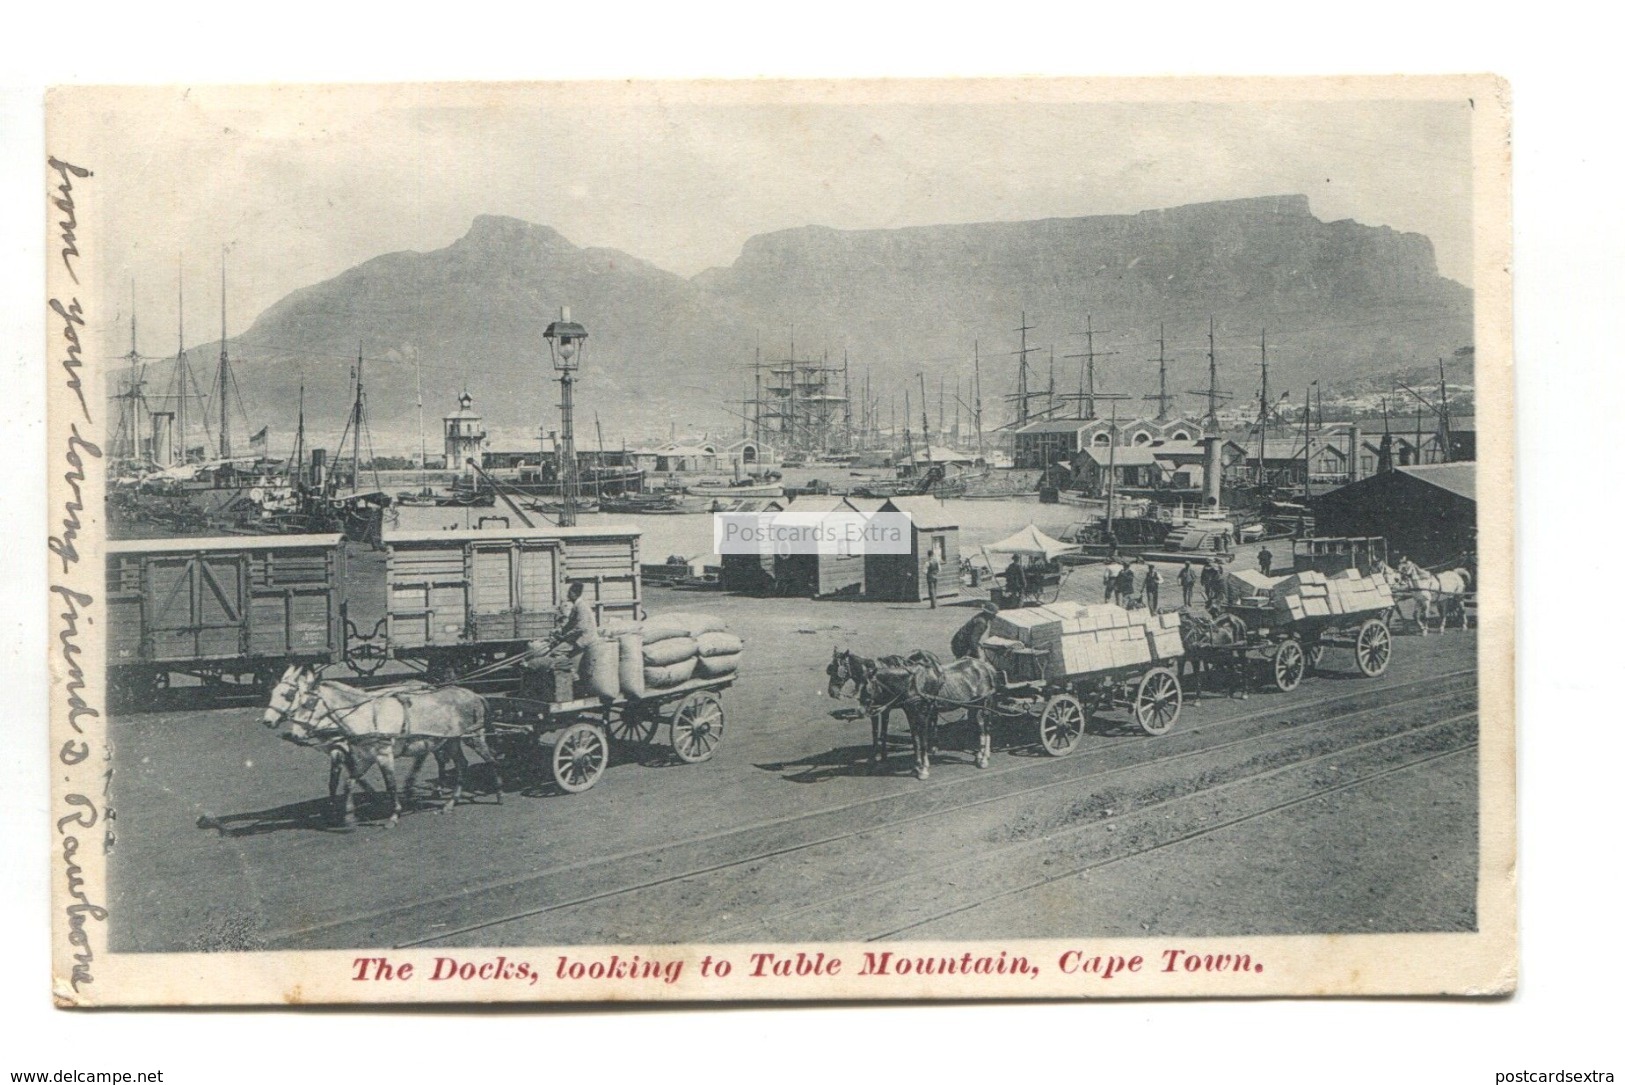 Cape Town - The Docks, Table Mountain, Horse Wagons, Tall Ships - Old South Africa Postcard - Sudáfrica